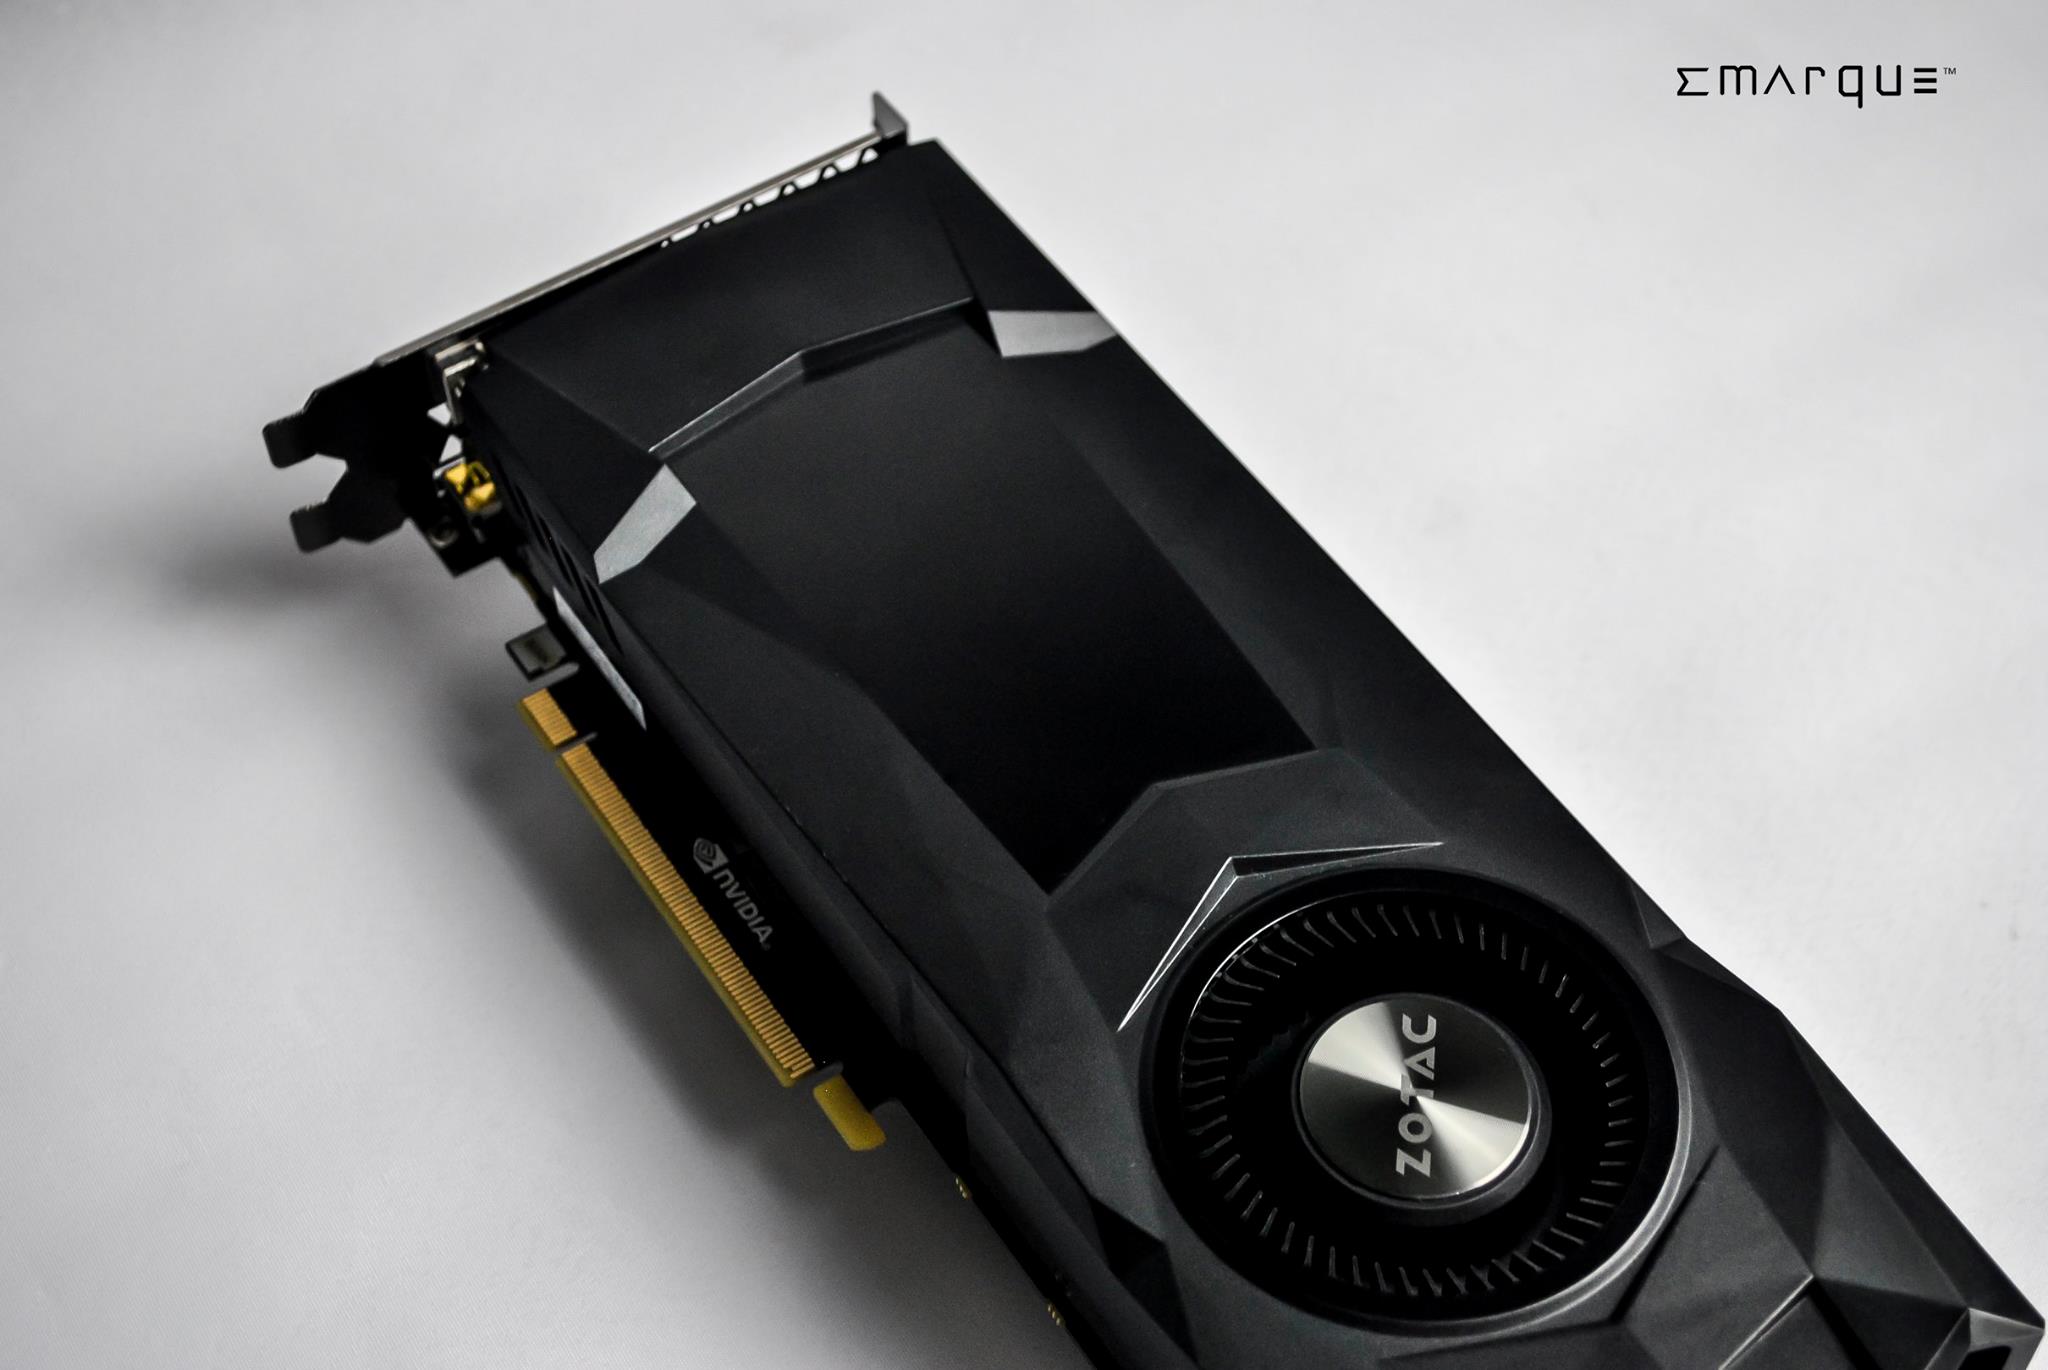 ZOTAC GeForce GTX 1070 Reference Edition is completely black